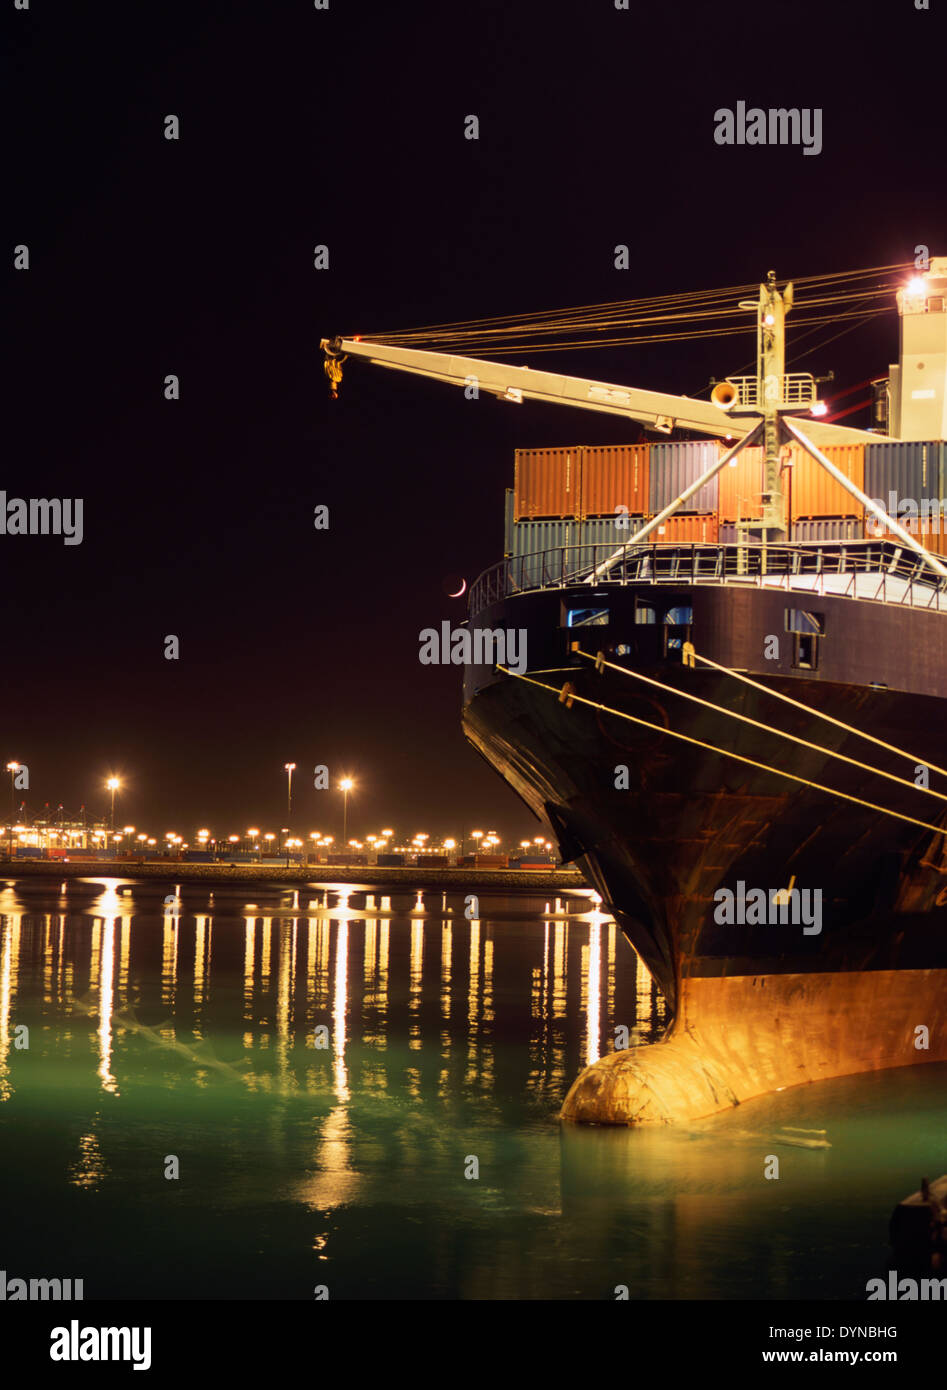 Illuminated crane and container ship at night, Port of Los Angeles, California, United States Stock Photo